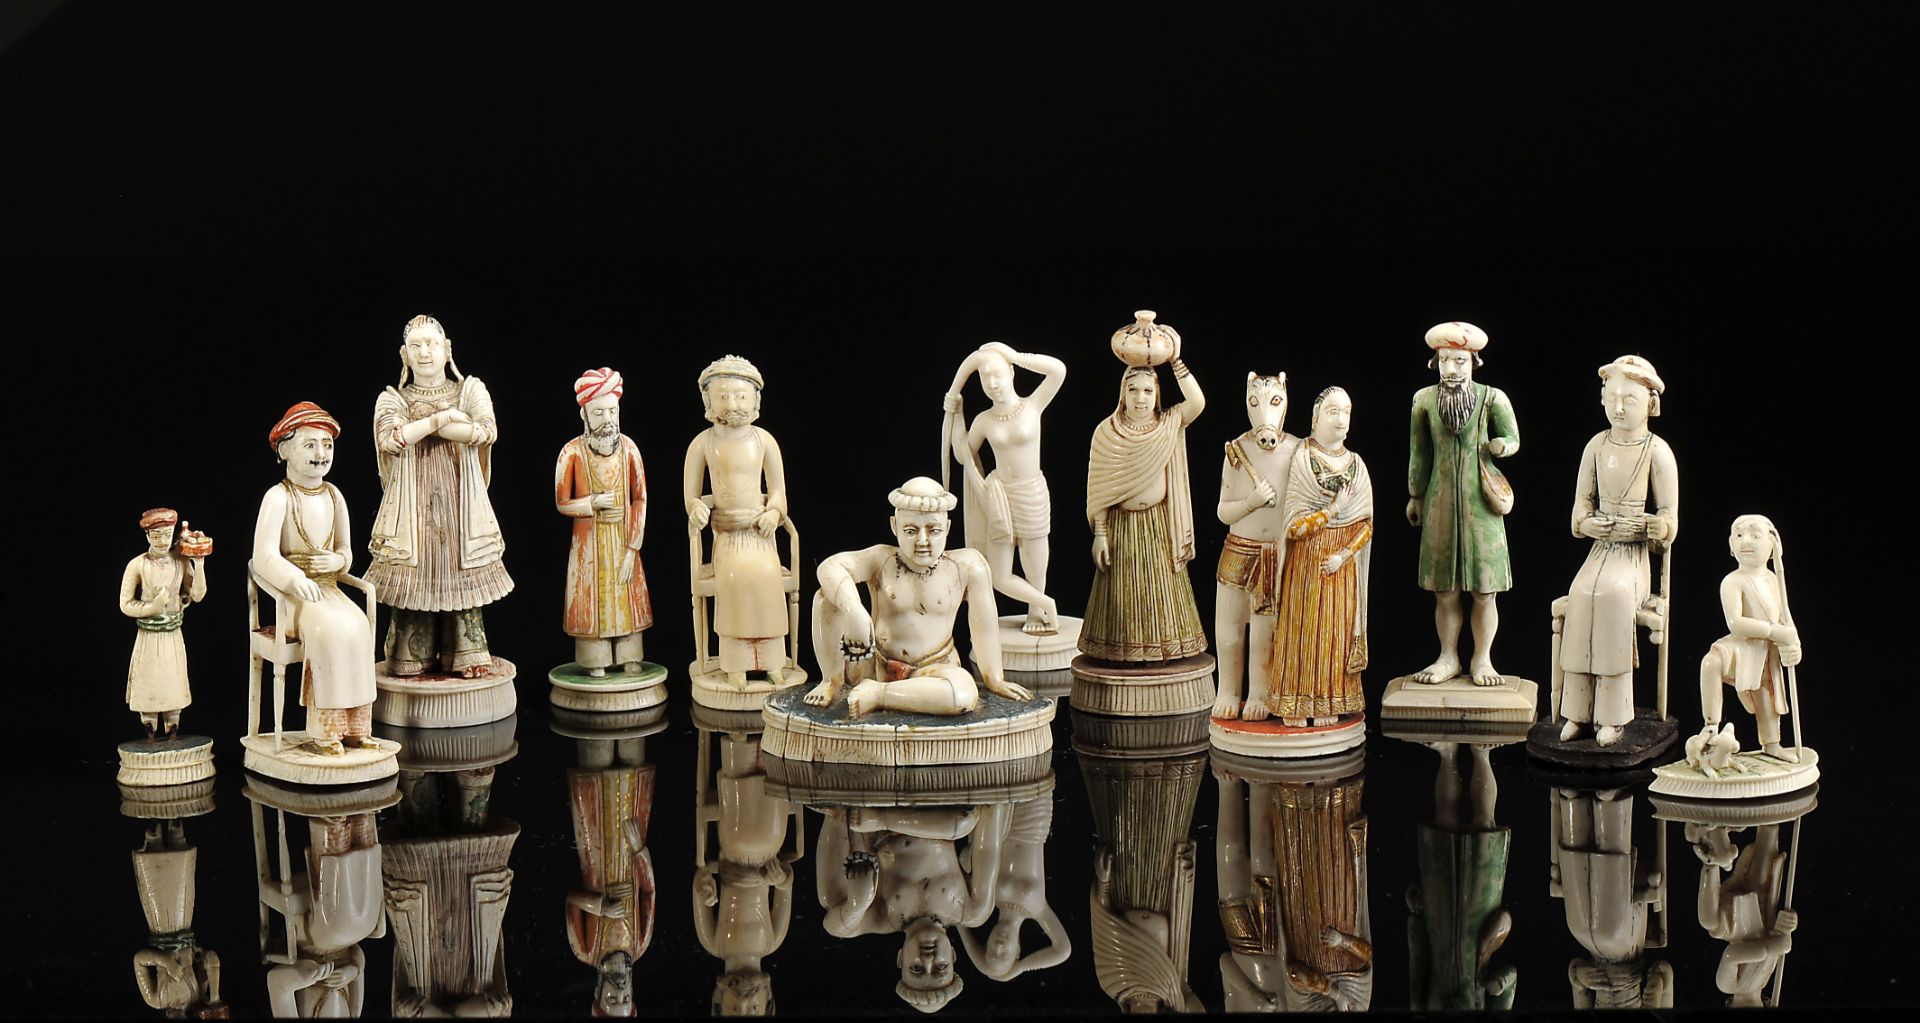 Twelve Assorted Chess Pieces, "Indian Society and its traditions"